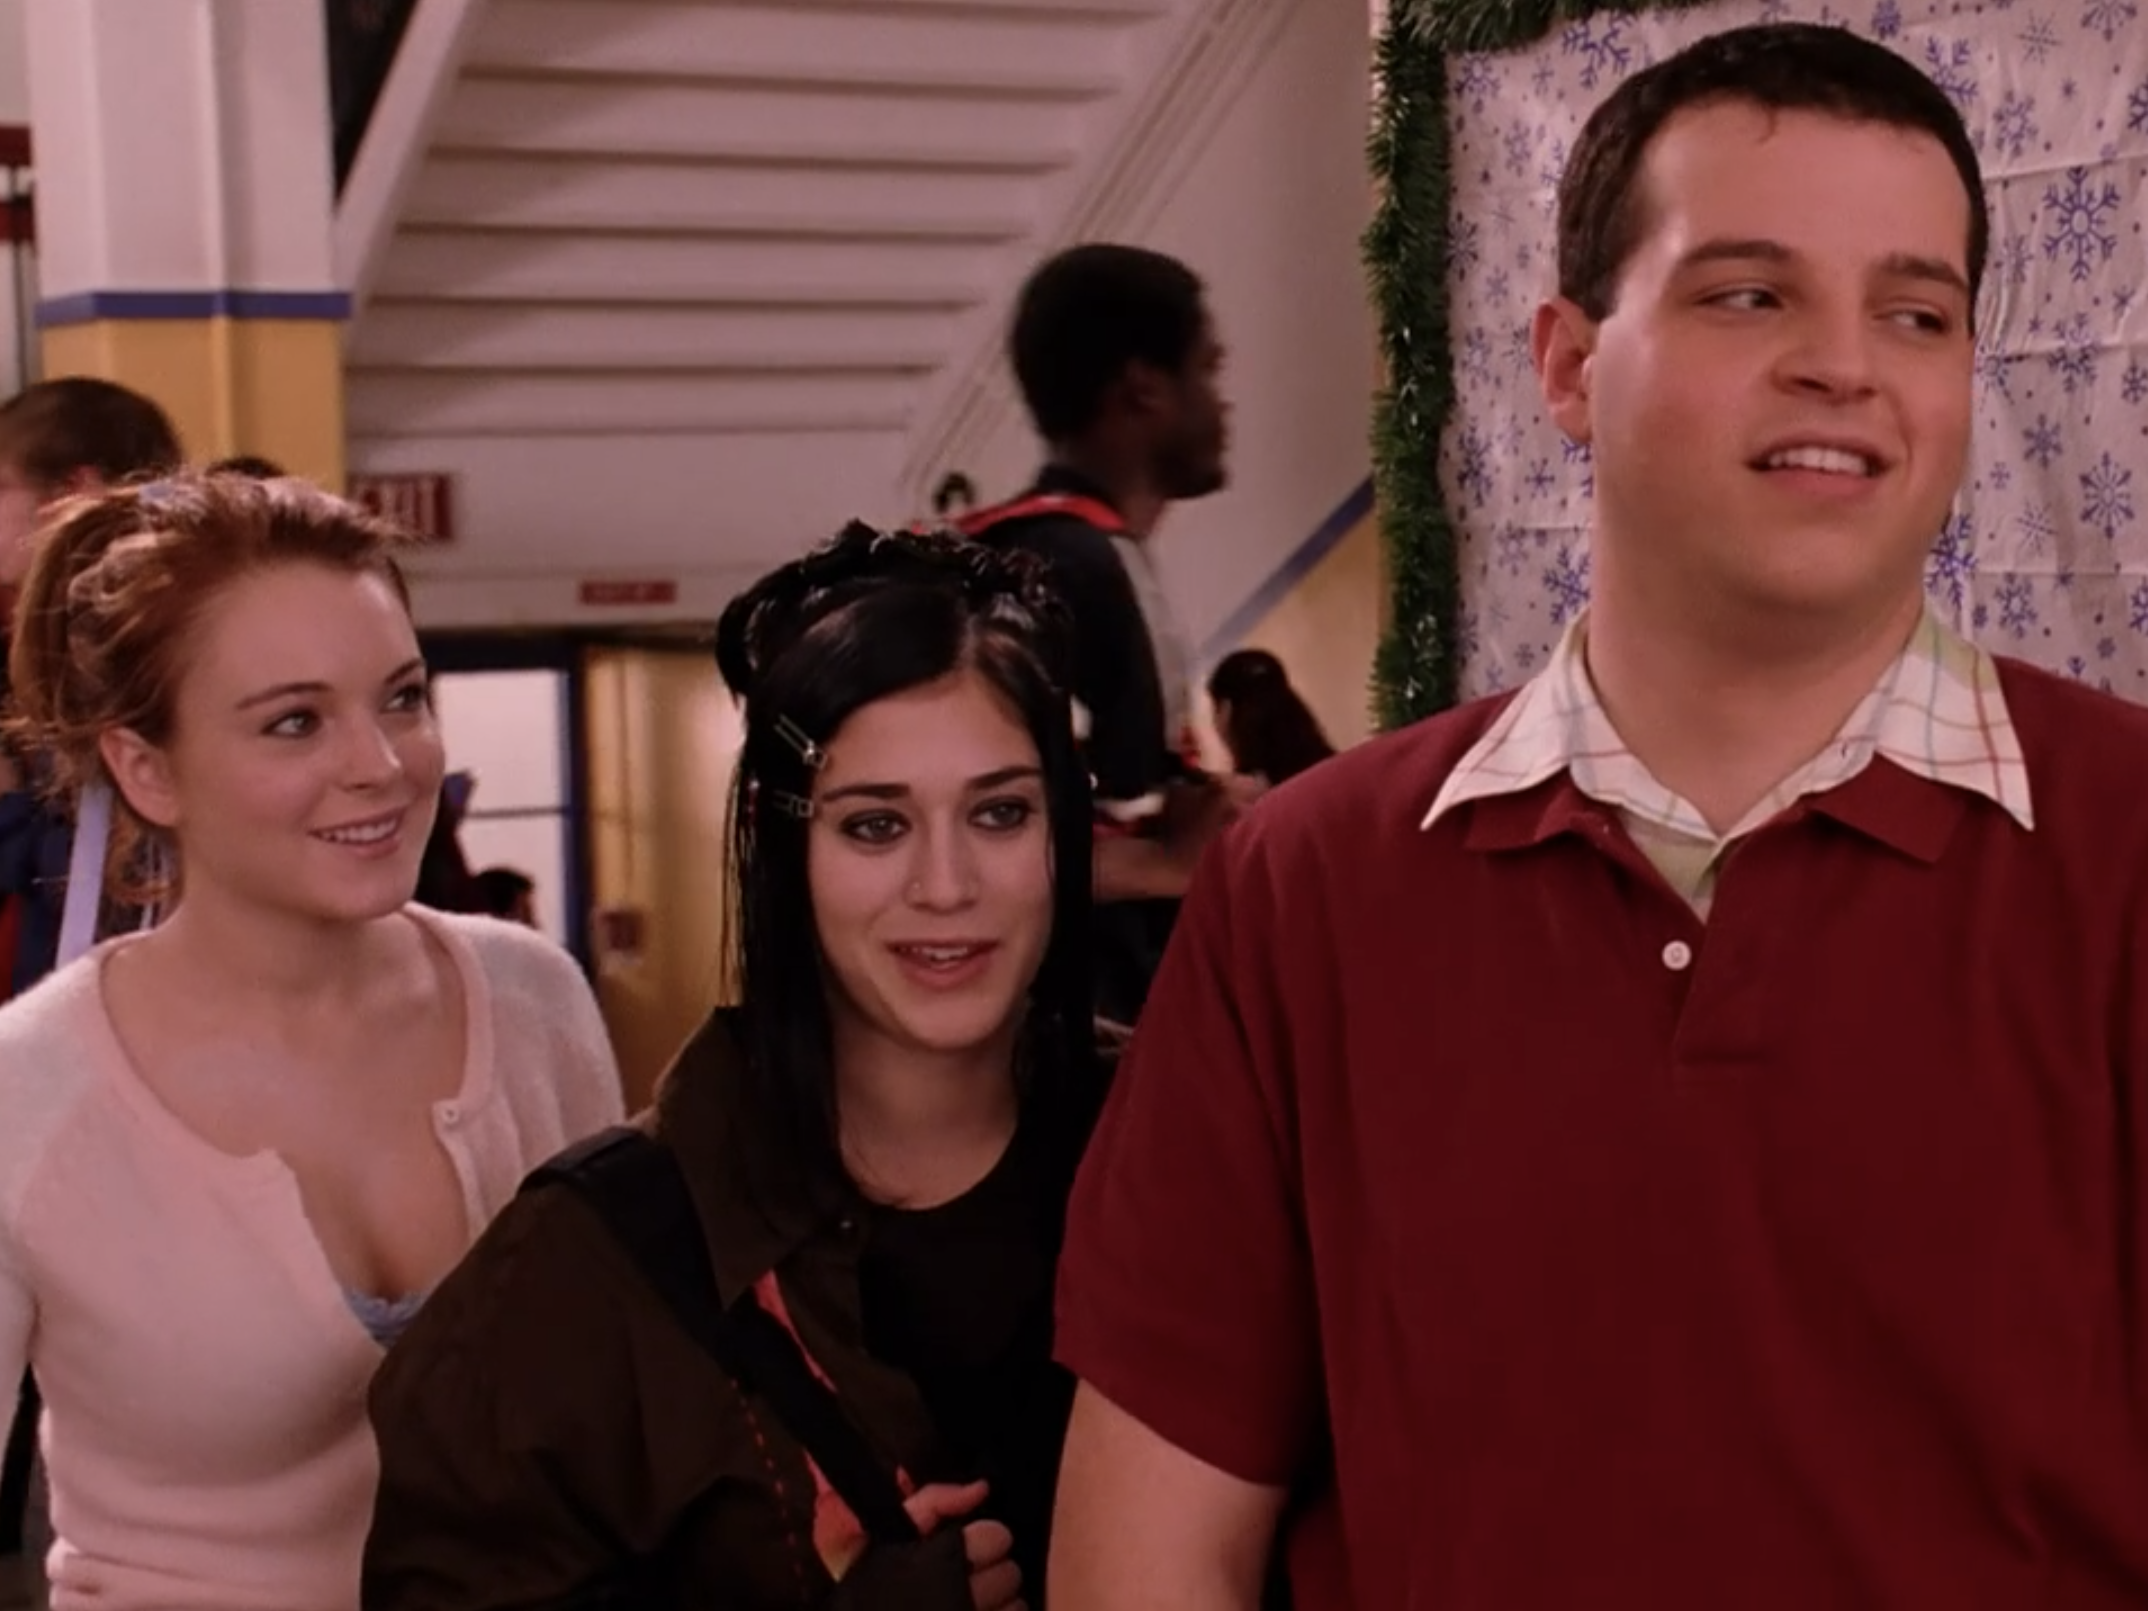 Lindsay Lohan, Lizzy Caplan, and Daniel Franzese in "Mean Girls."